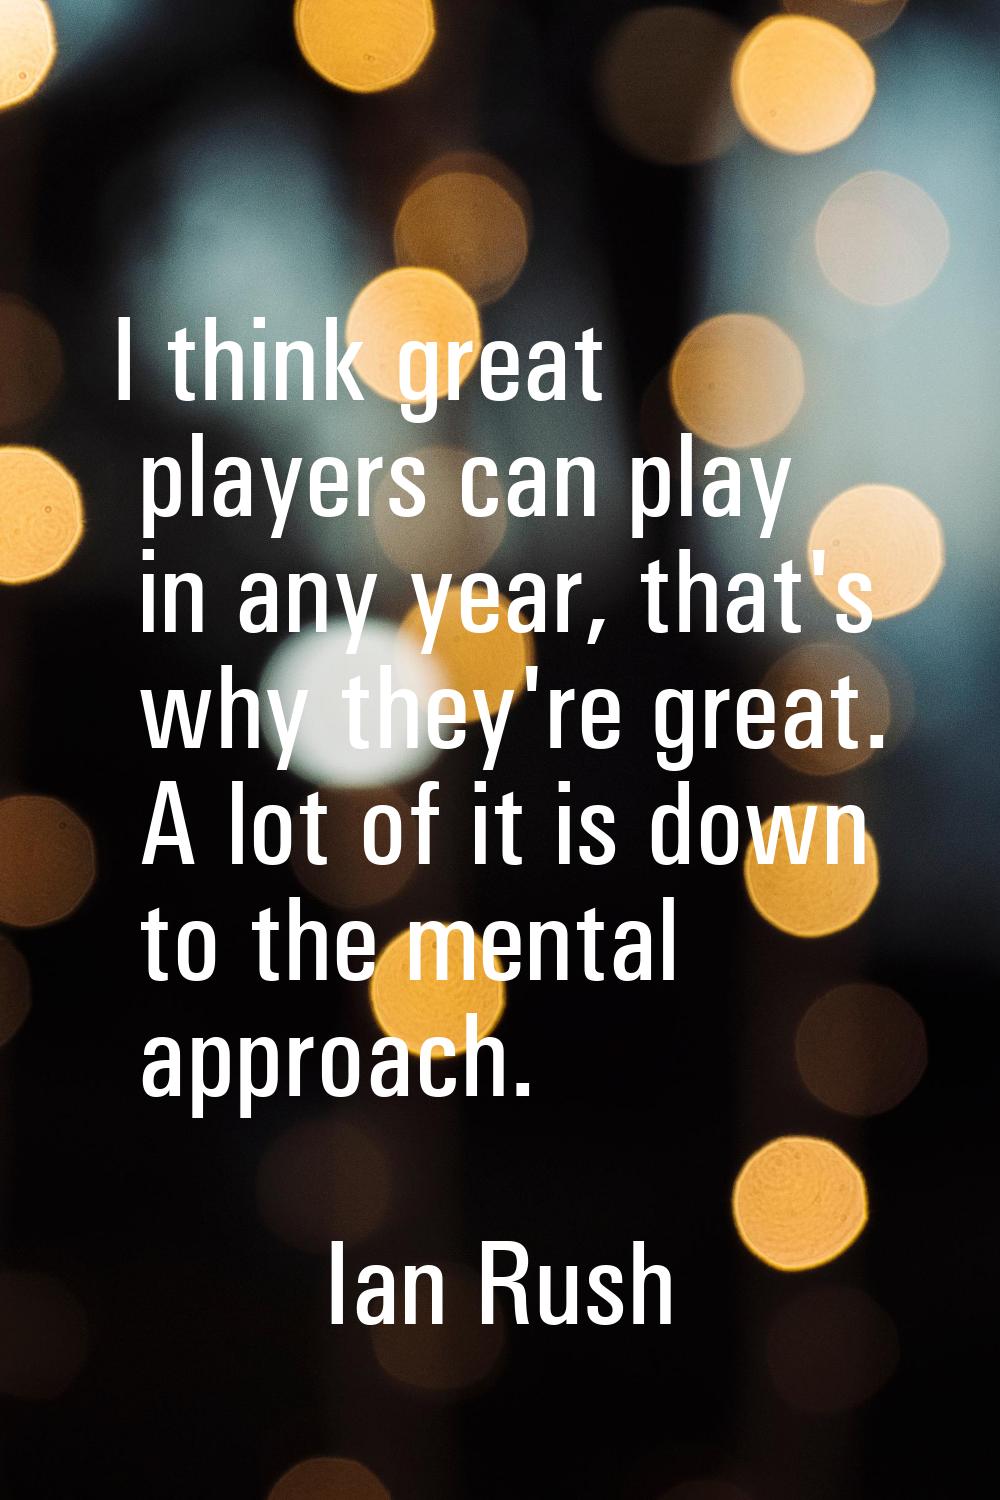 I think great players can play in any year, that's why they're great. A lot of it is down to the me